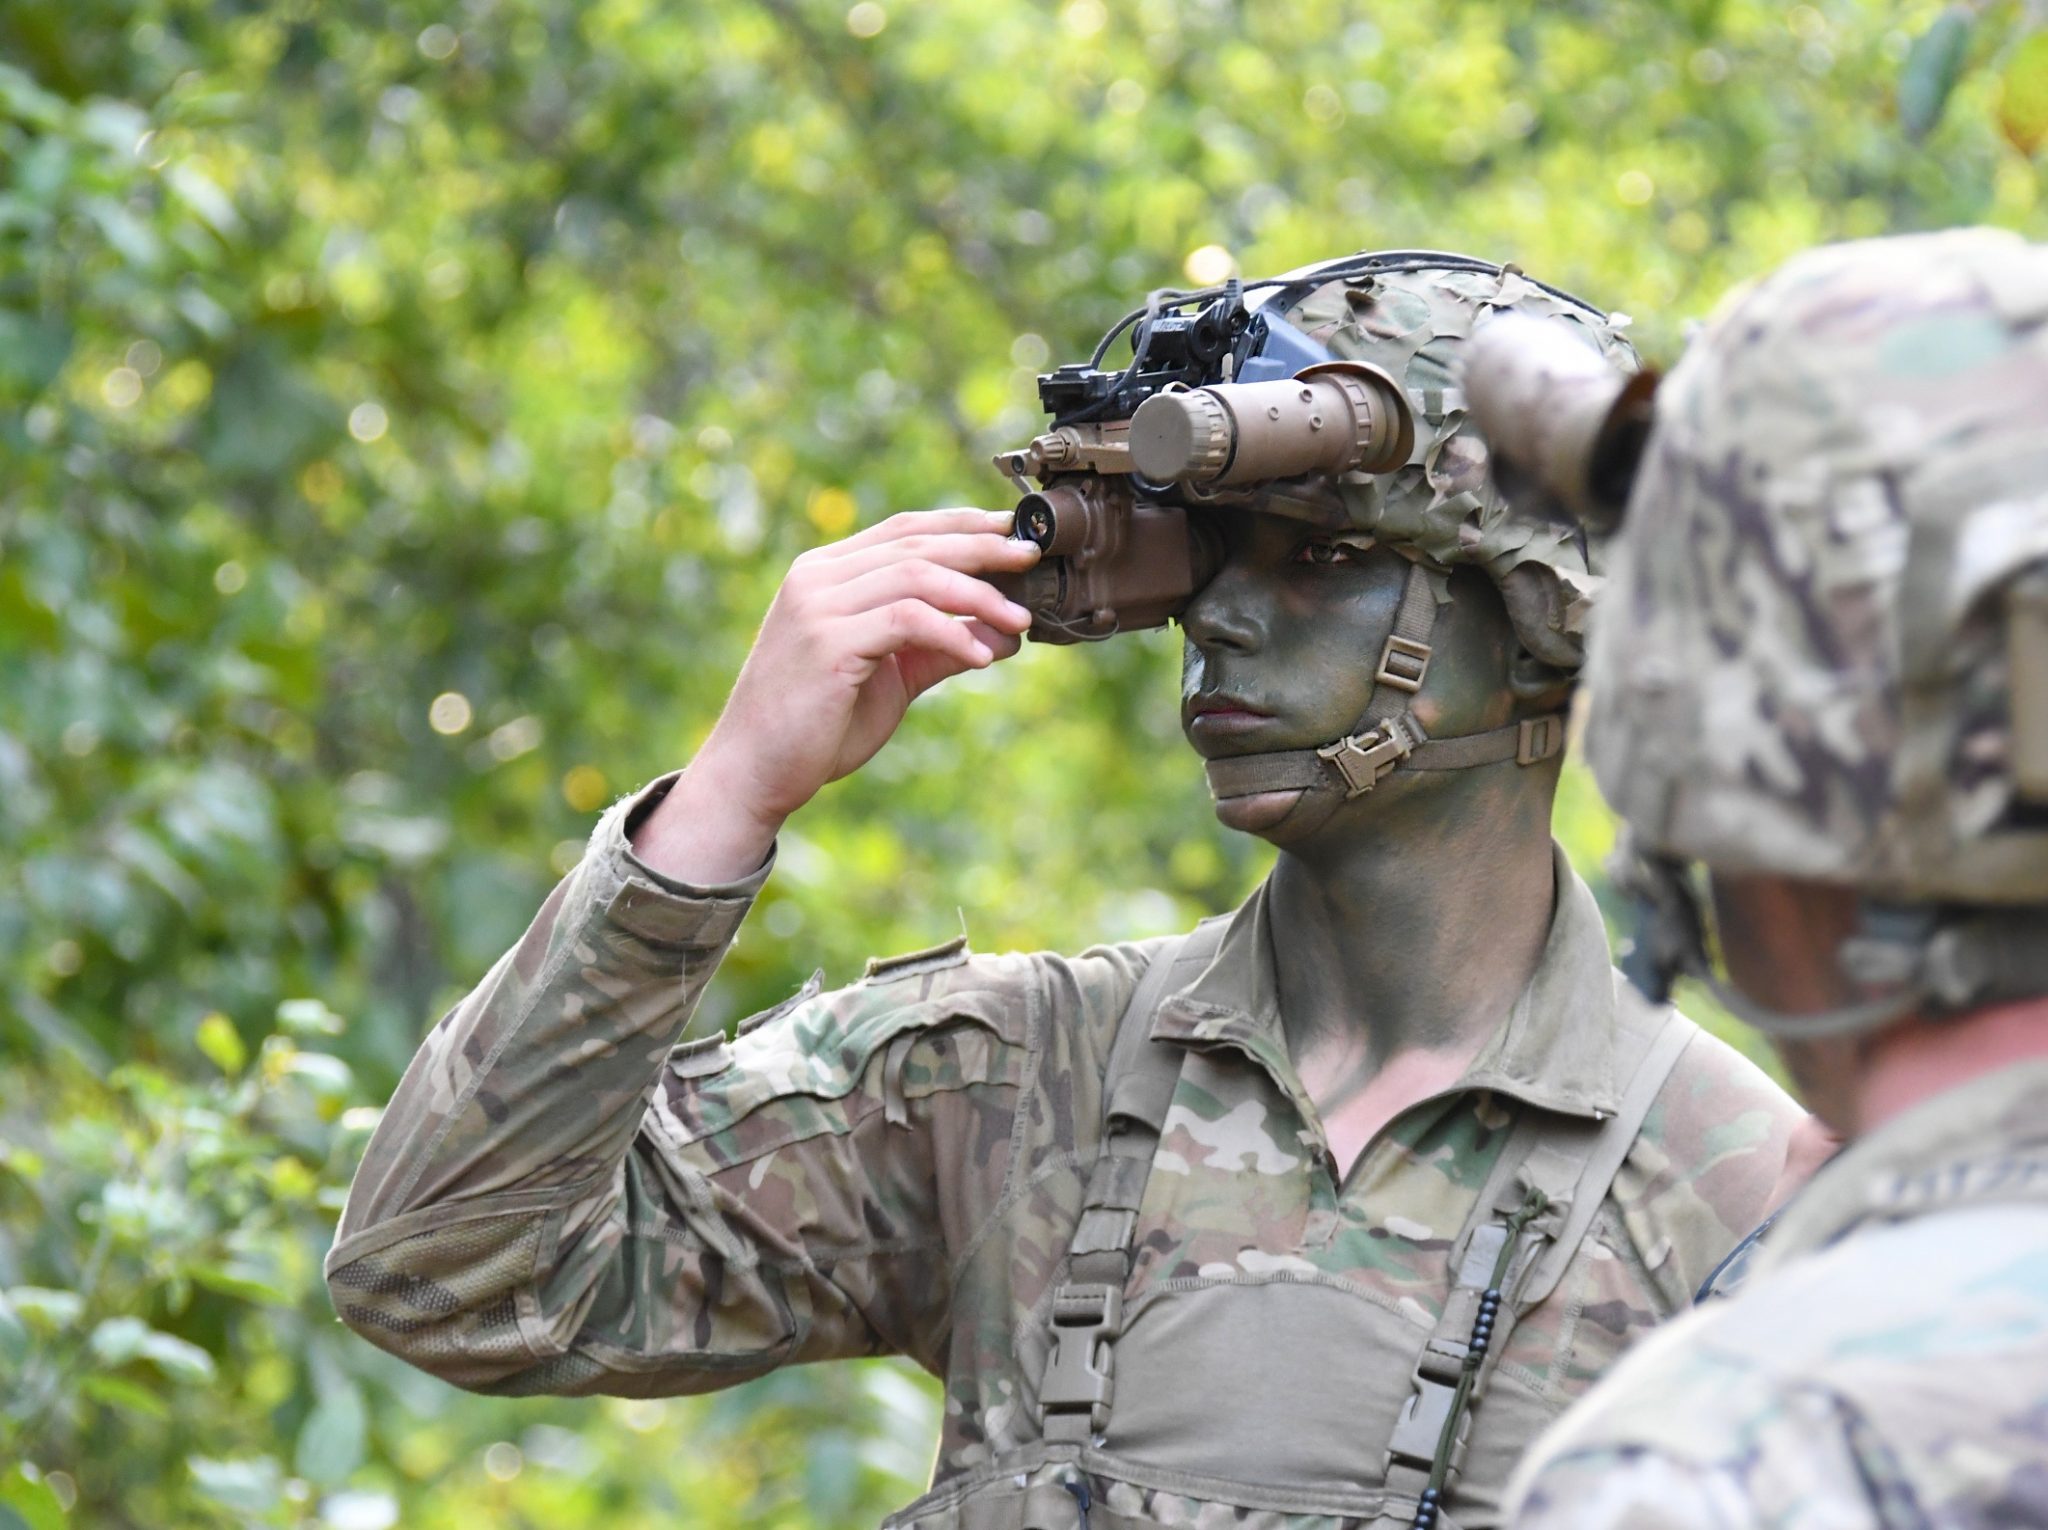 Elbit Systems Us Subsidiary Awarded 54 Million Enhanced Night Vision Goggle Order For The Us 7520